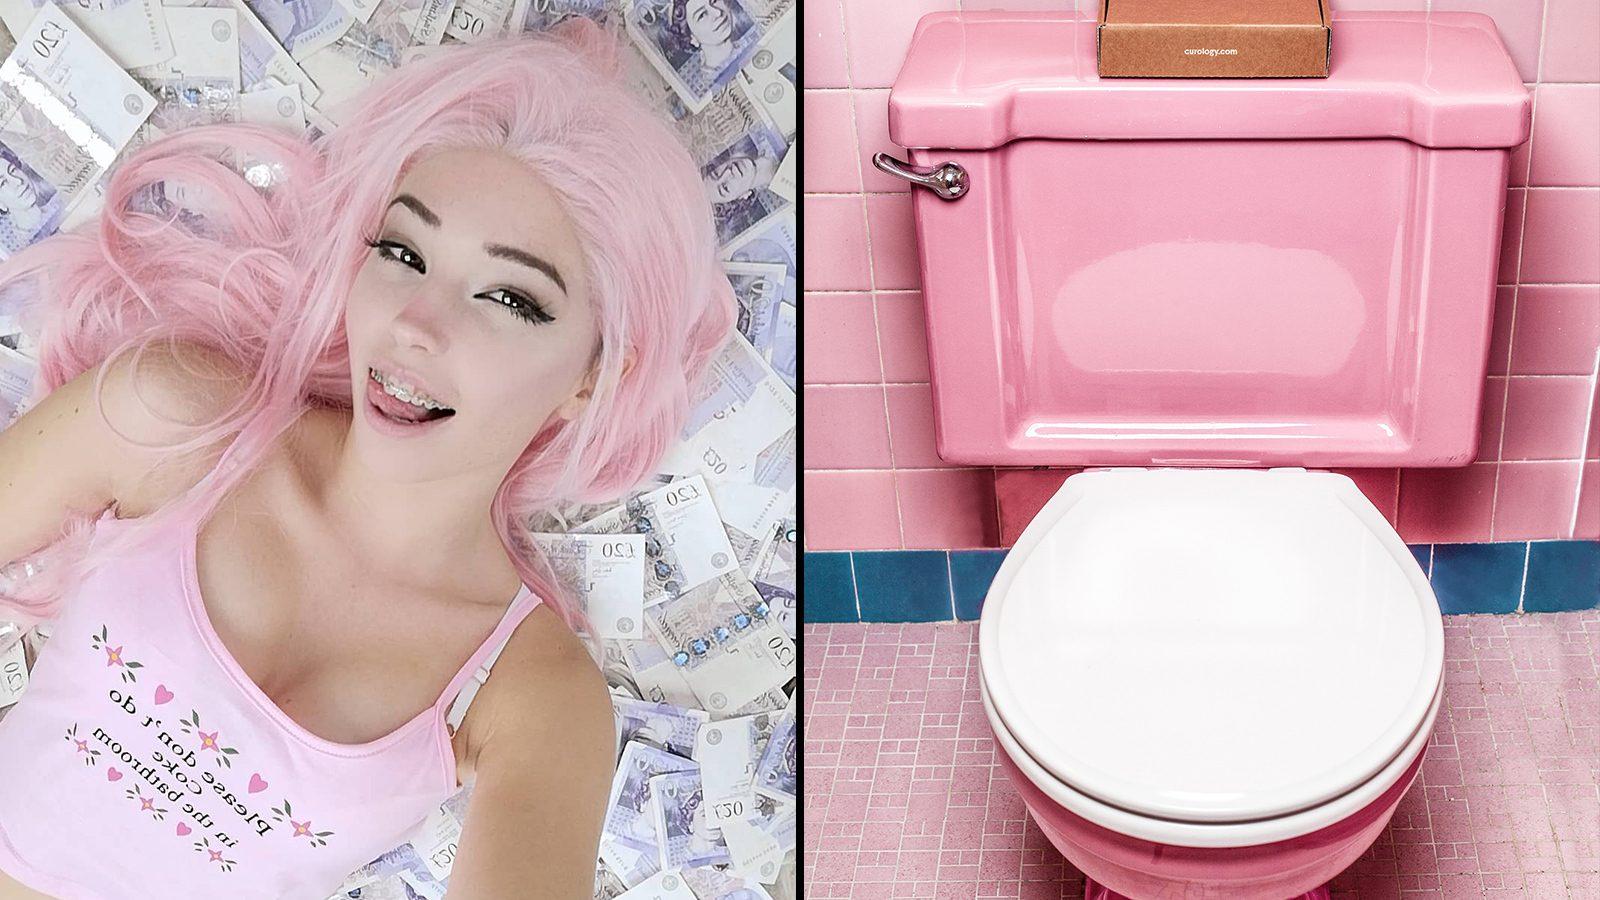 This r claims he vaped Belle Delphine's $30 bath water - PopBuzz